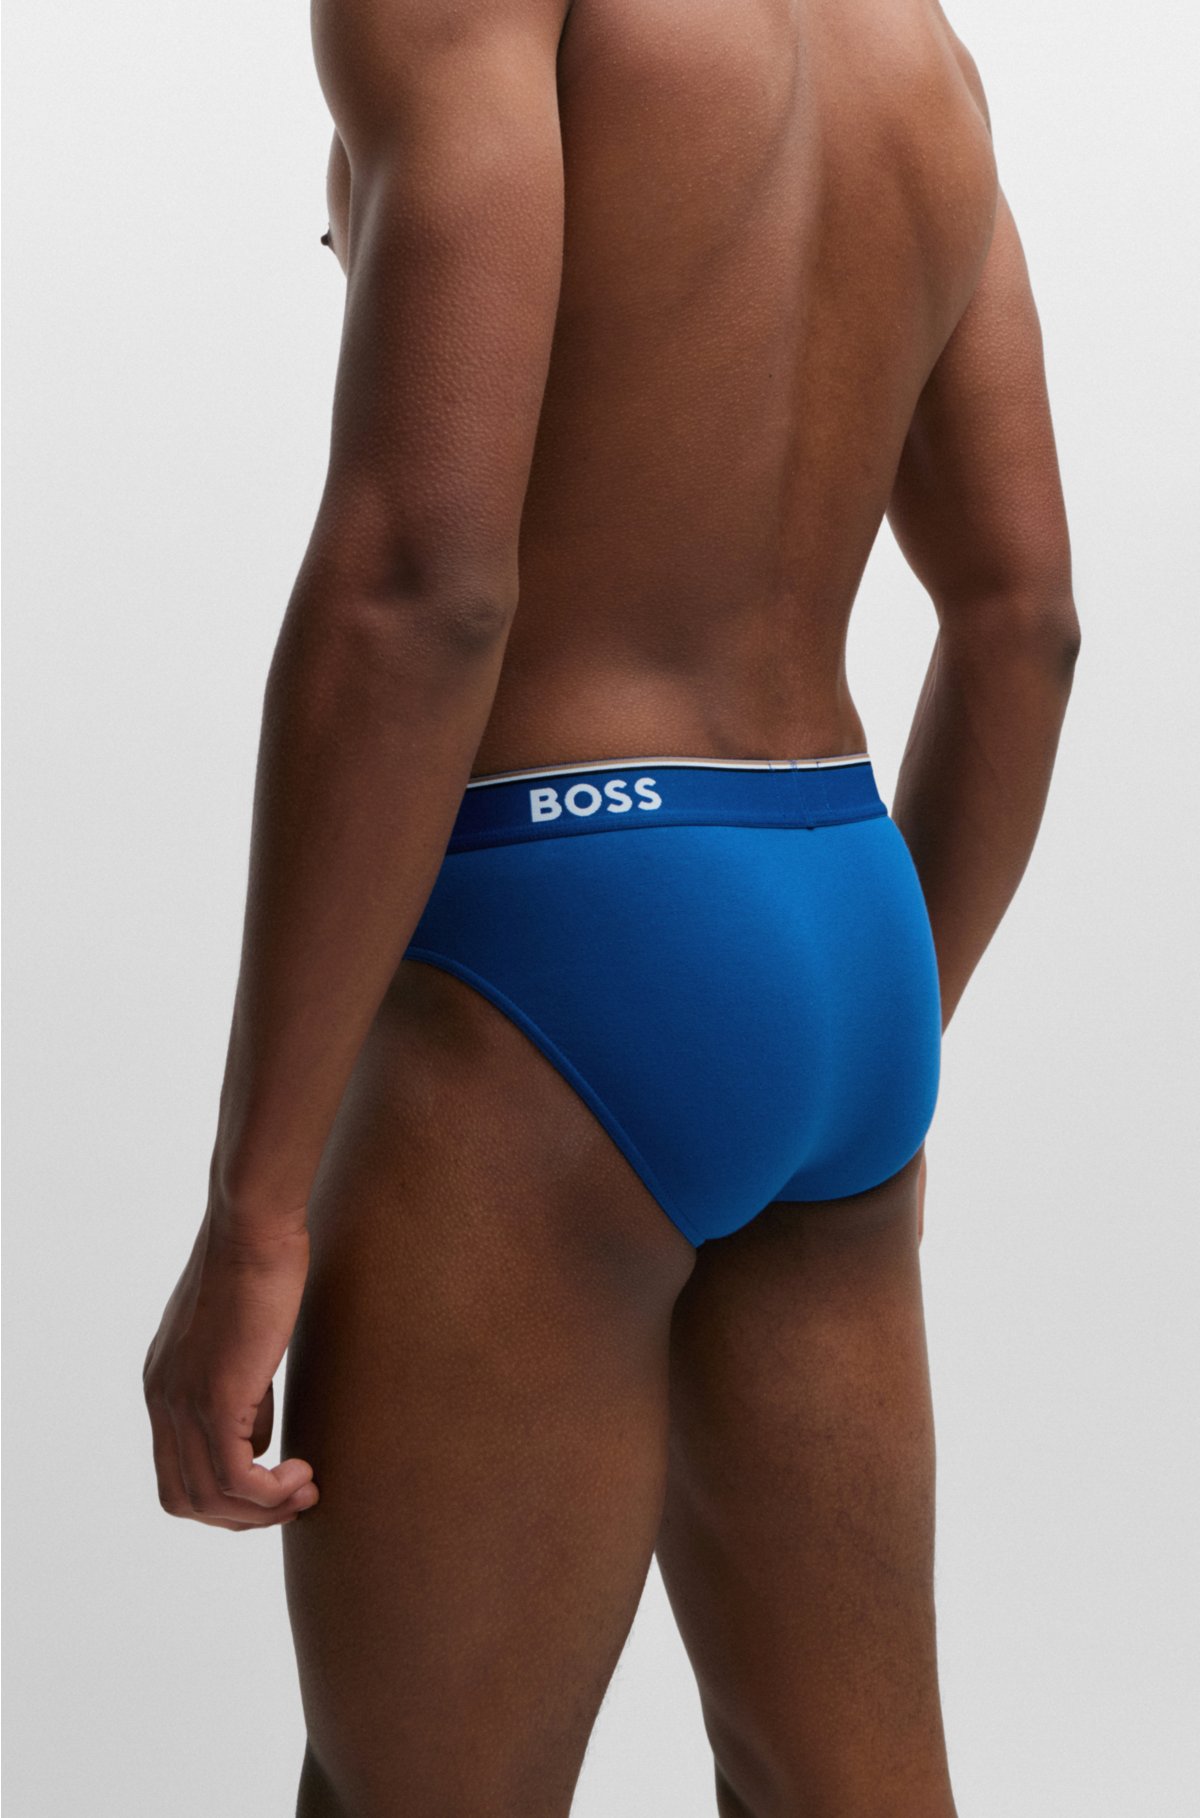 briefs of BOSS Three-pack logo stretch-cotton - waistbands with